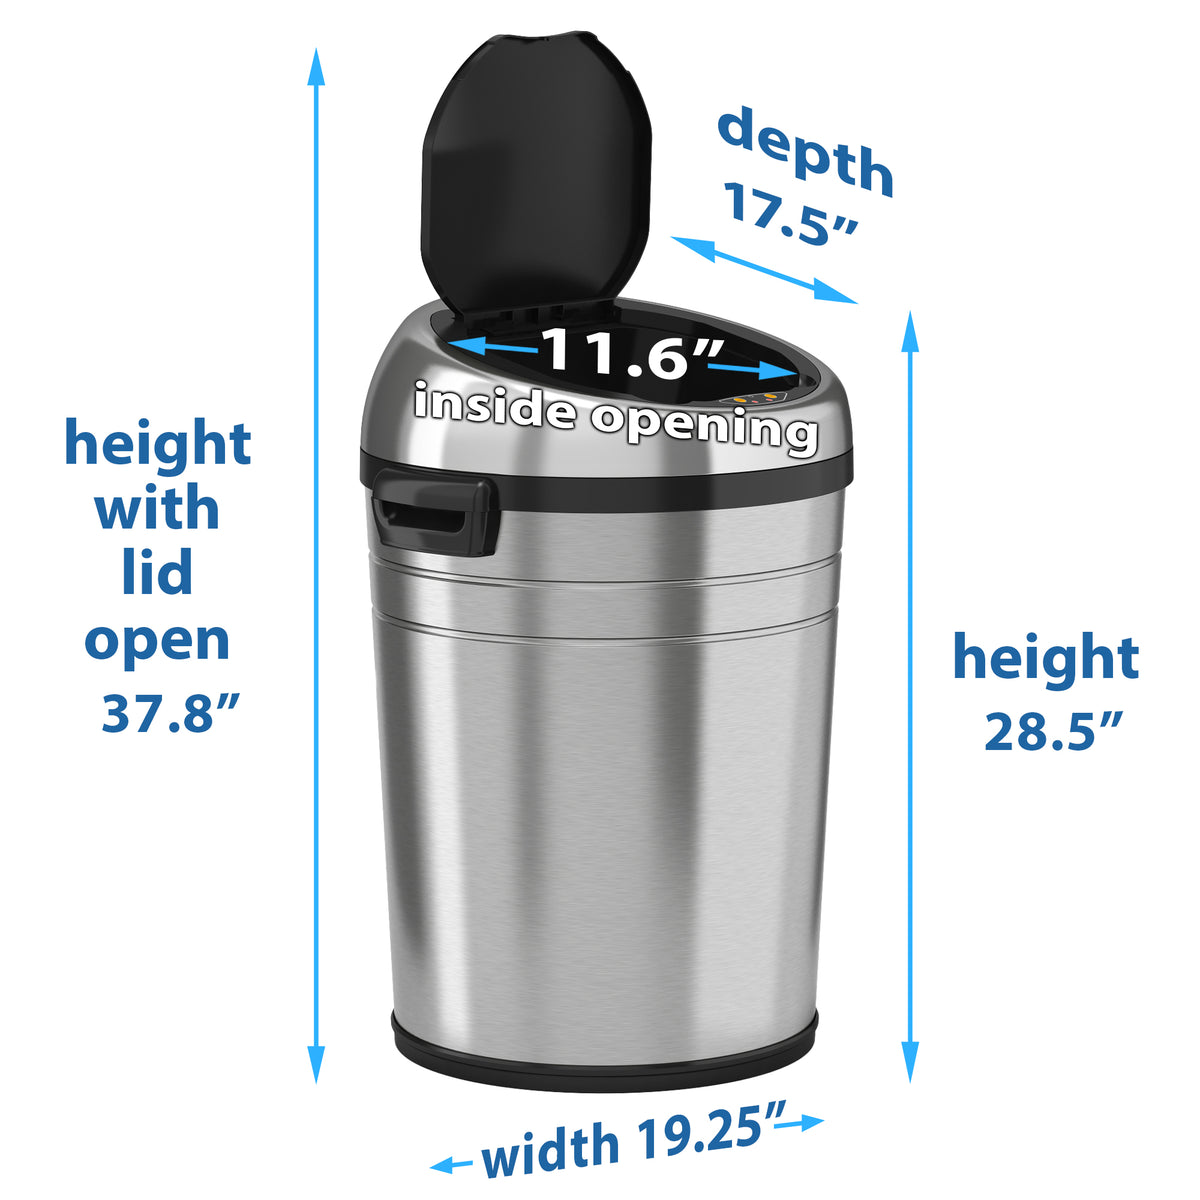 iTouchless 18 Gallon Sensor Trash Can with Wheels dimensions